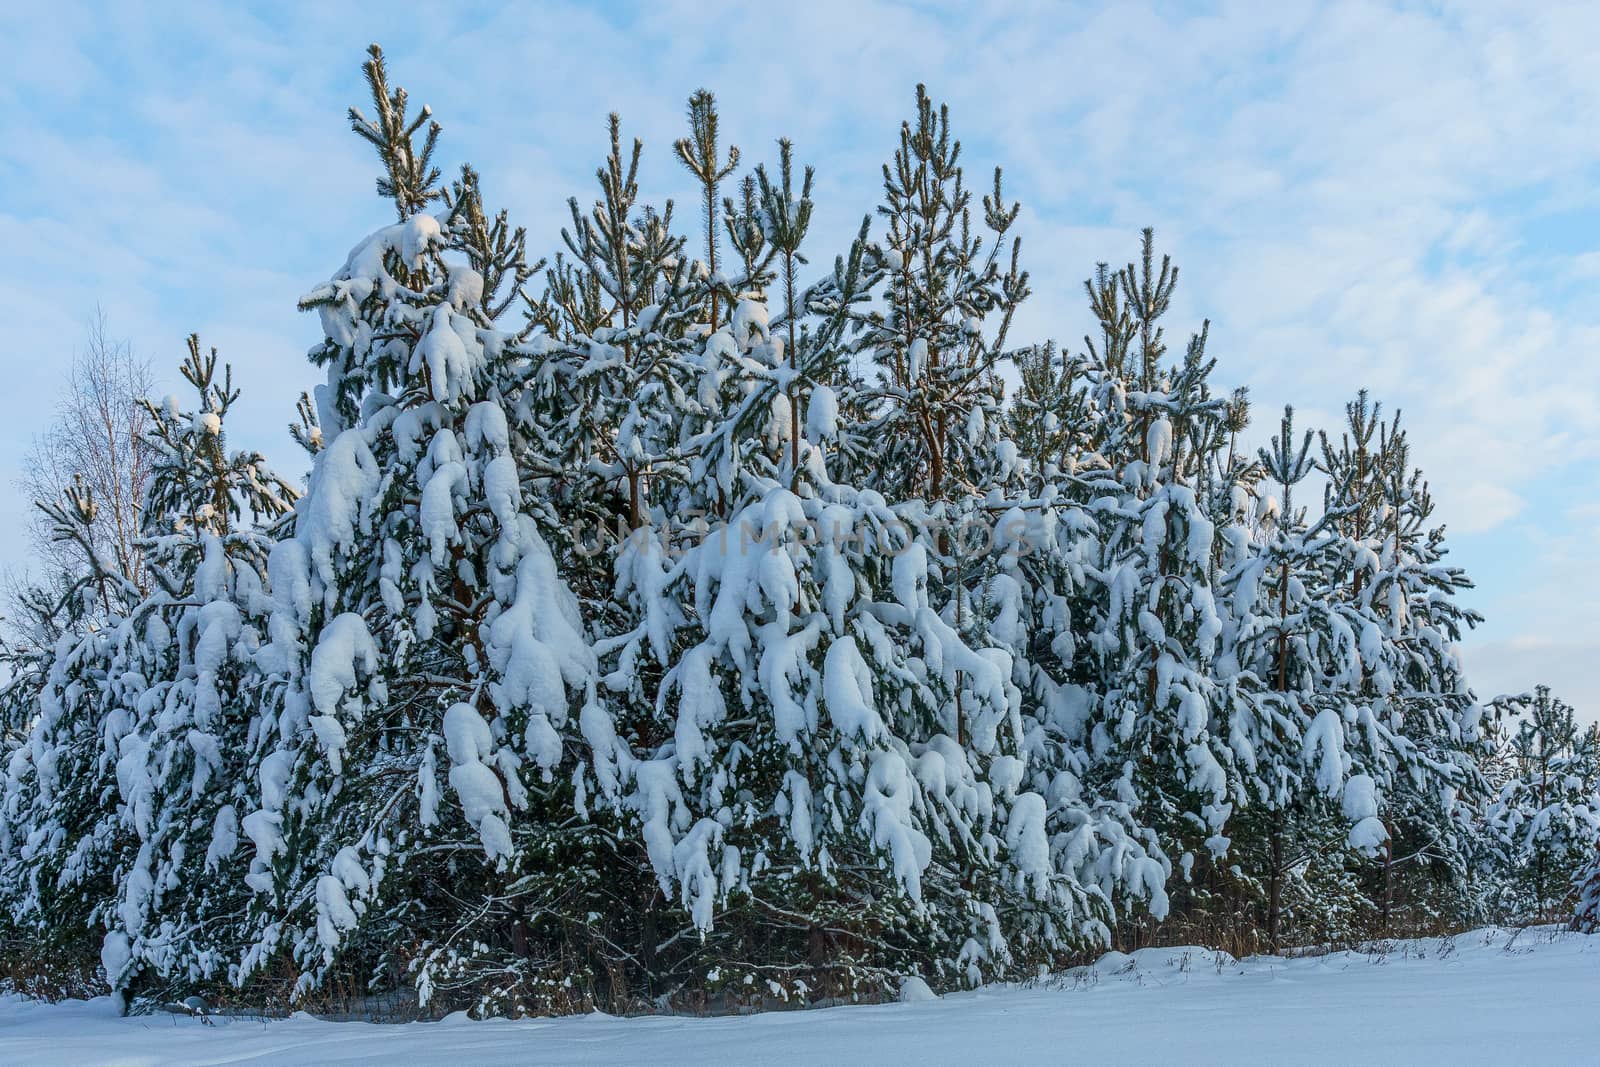 Spruce forest under the snow on the background of a winter sky with blue skylights